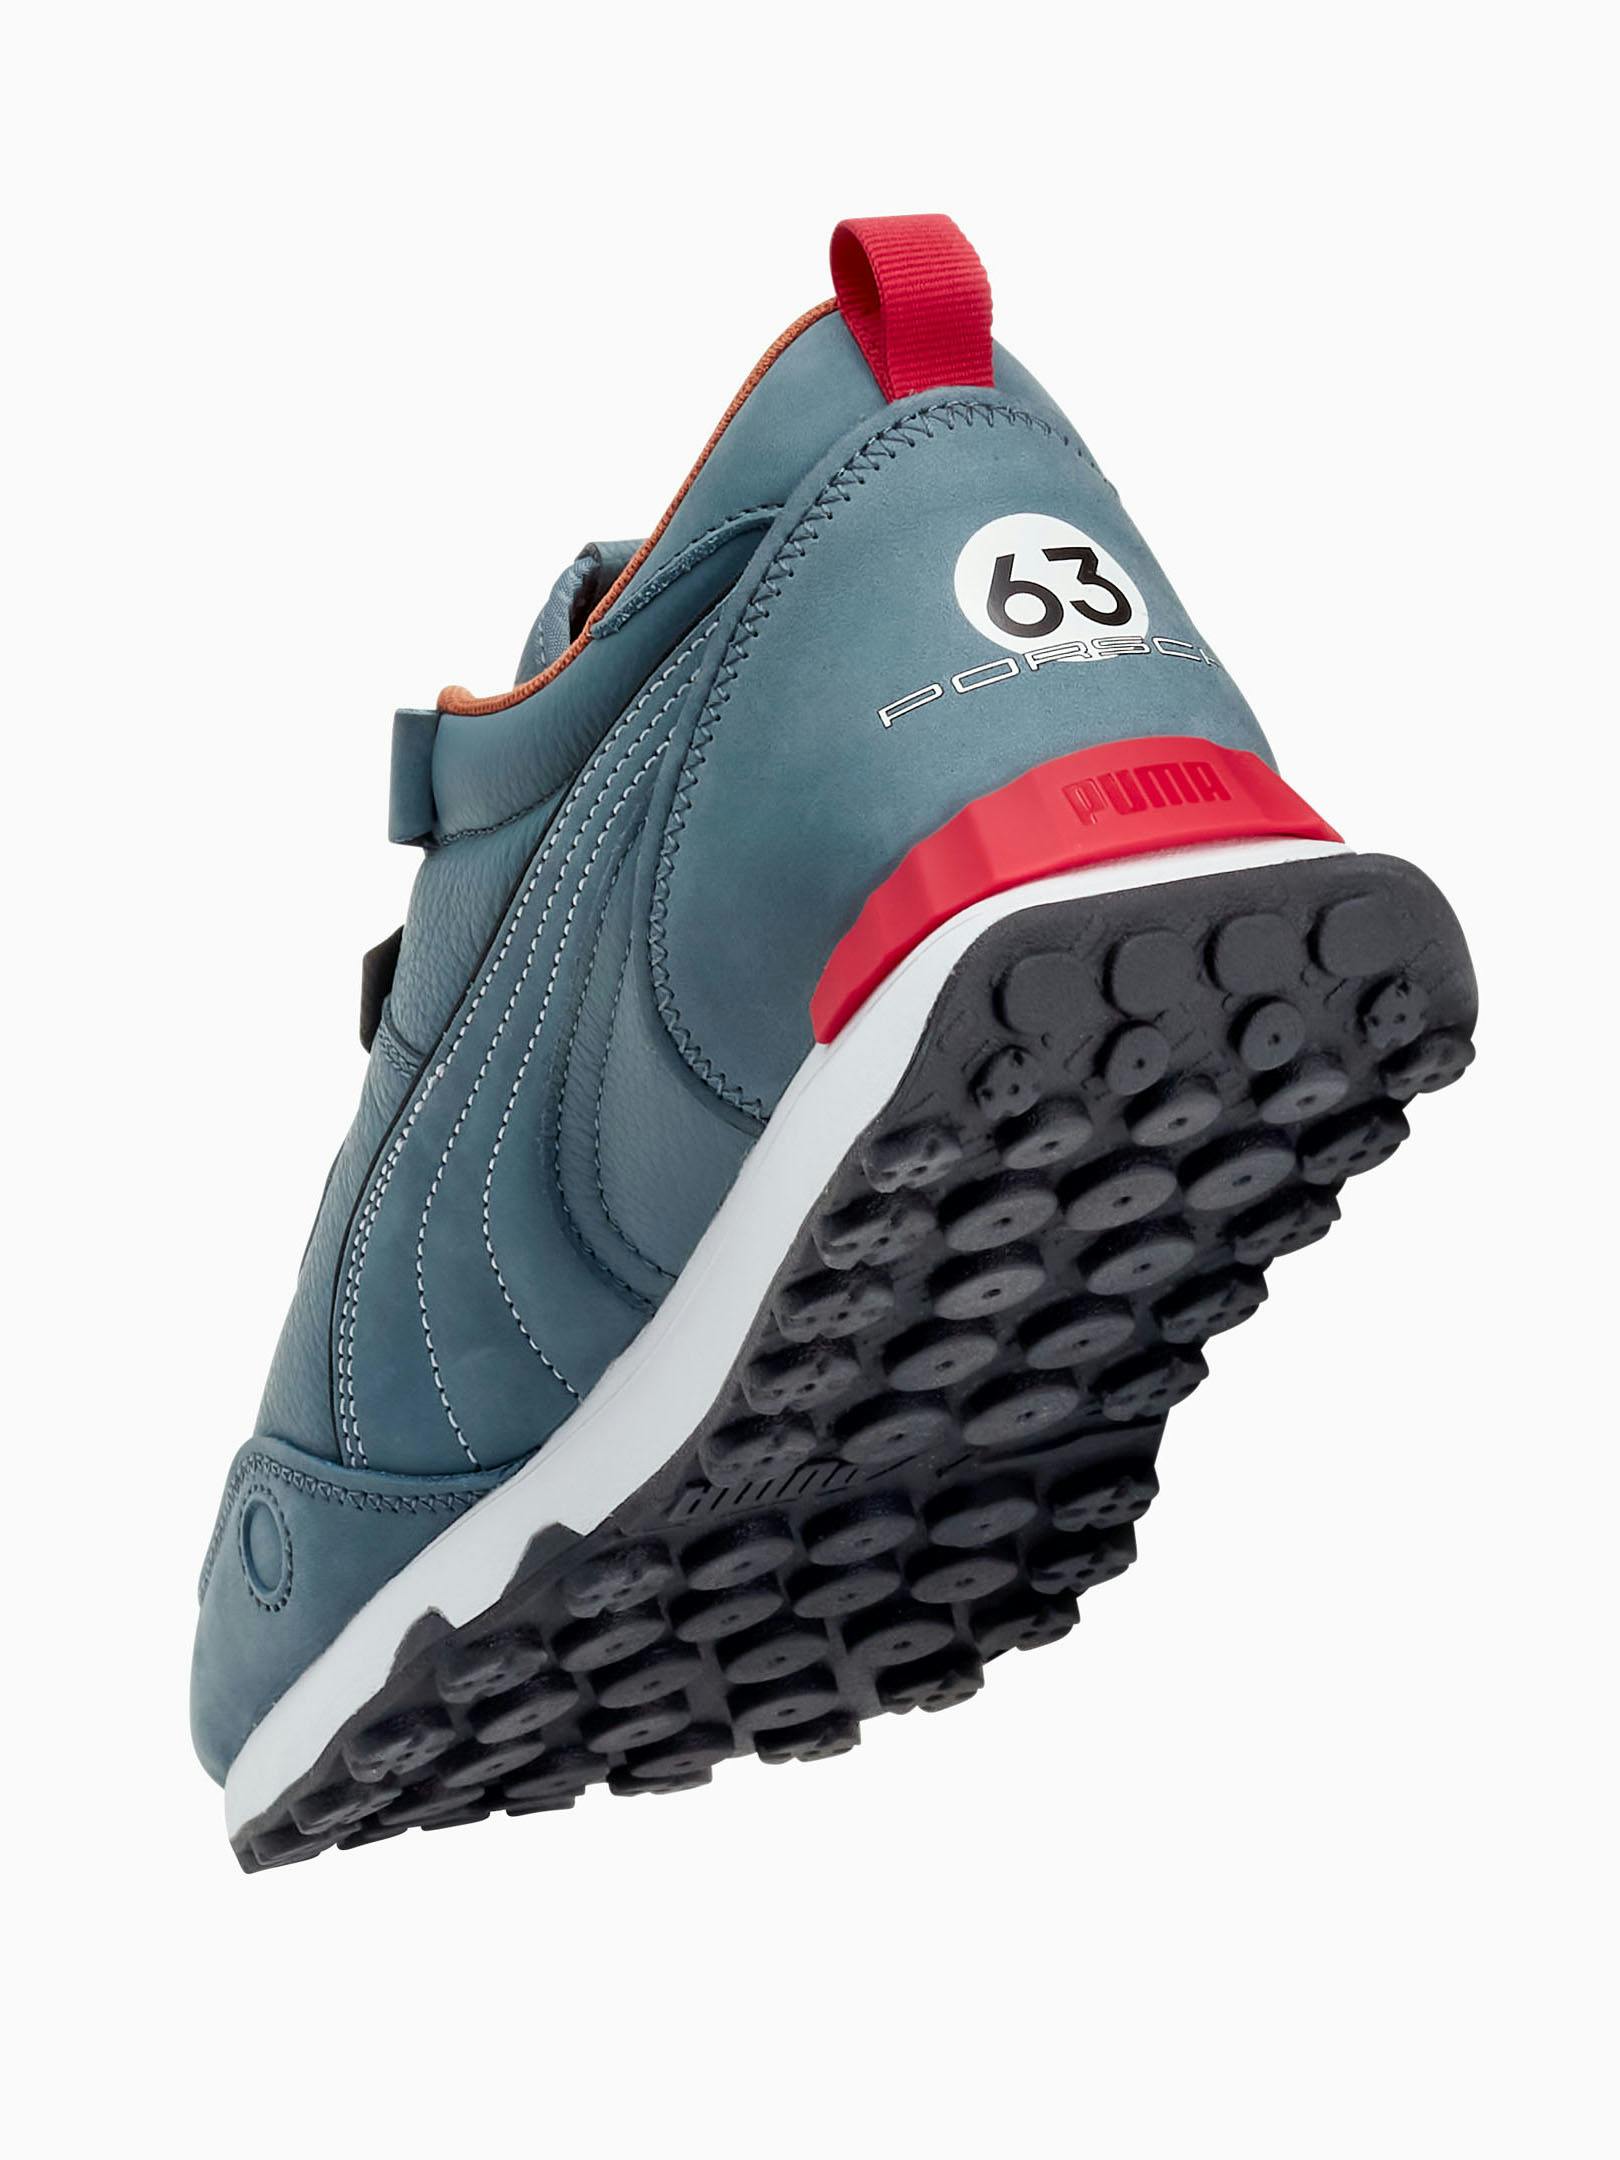 You can see the blue heritage sneaker with red details and the number 63 from Porsche in cooperation with Puma.